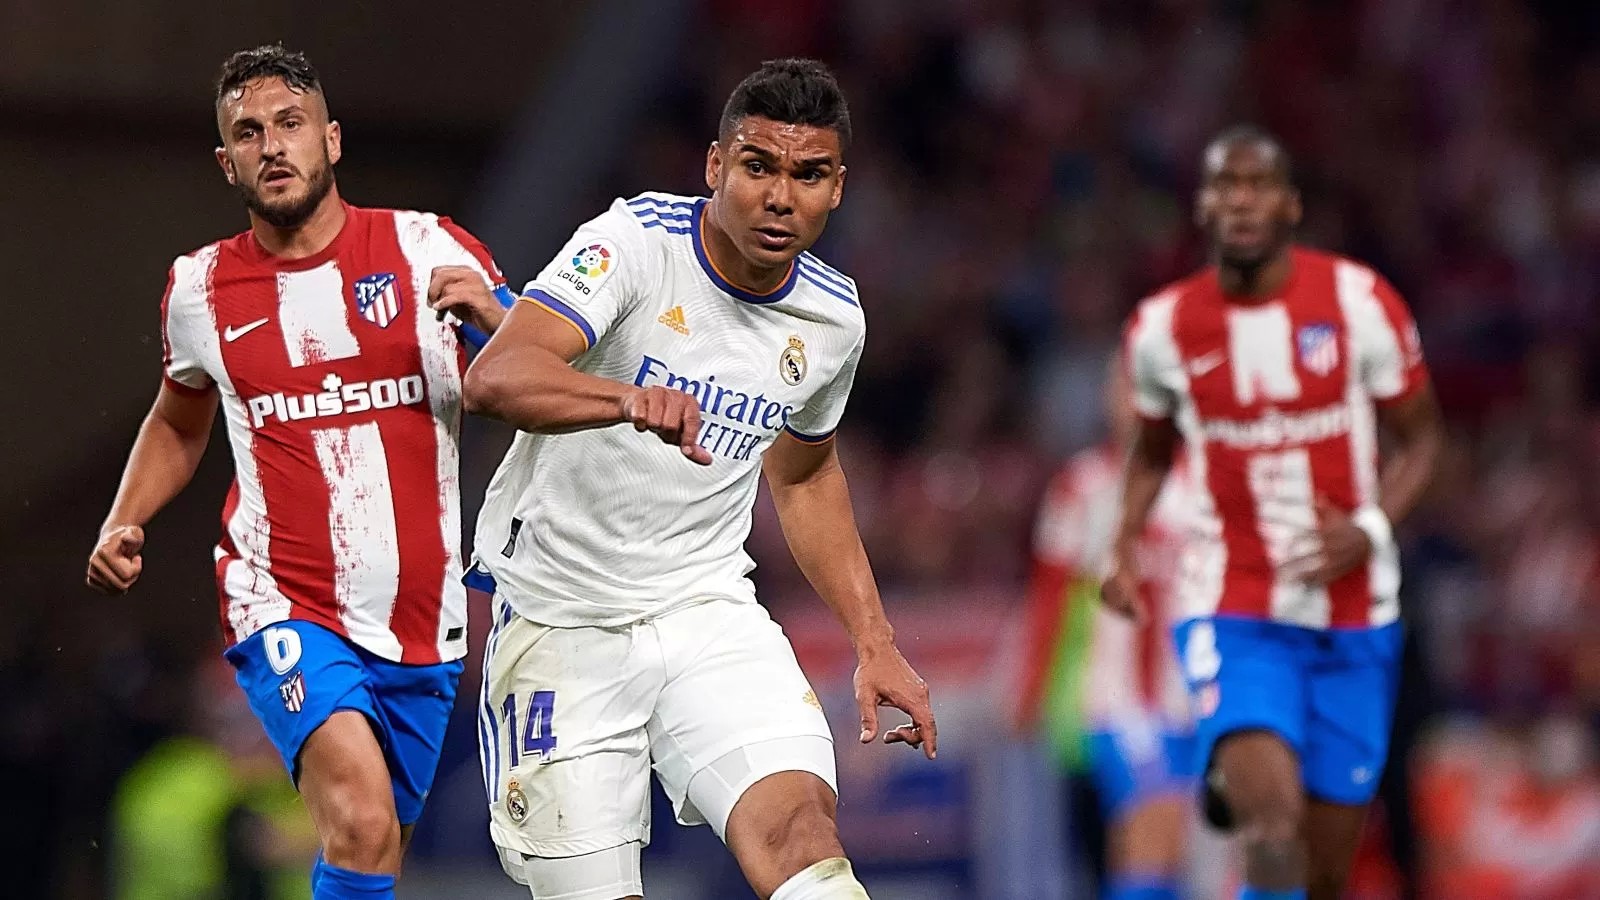 Man Utd confirm ‘agreement’ with Real Madrid to sign Casemiro for £60m plus £10m in add-ons